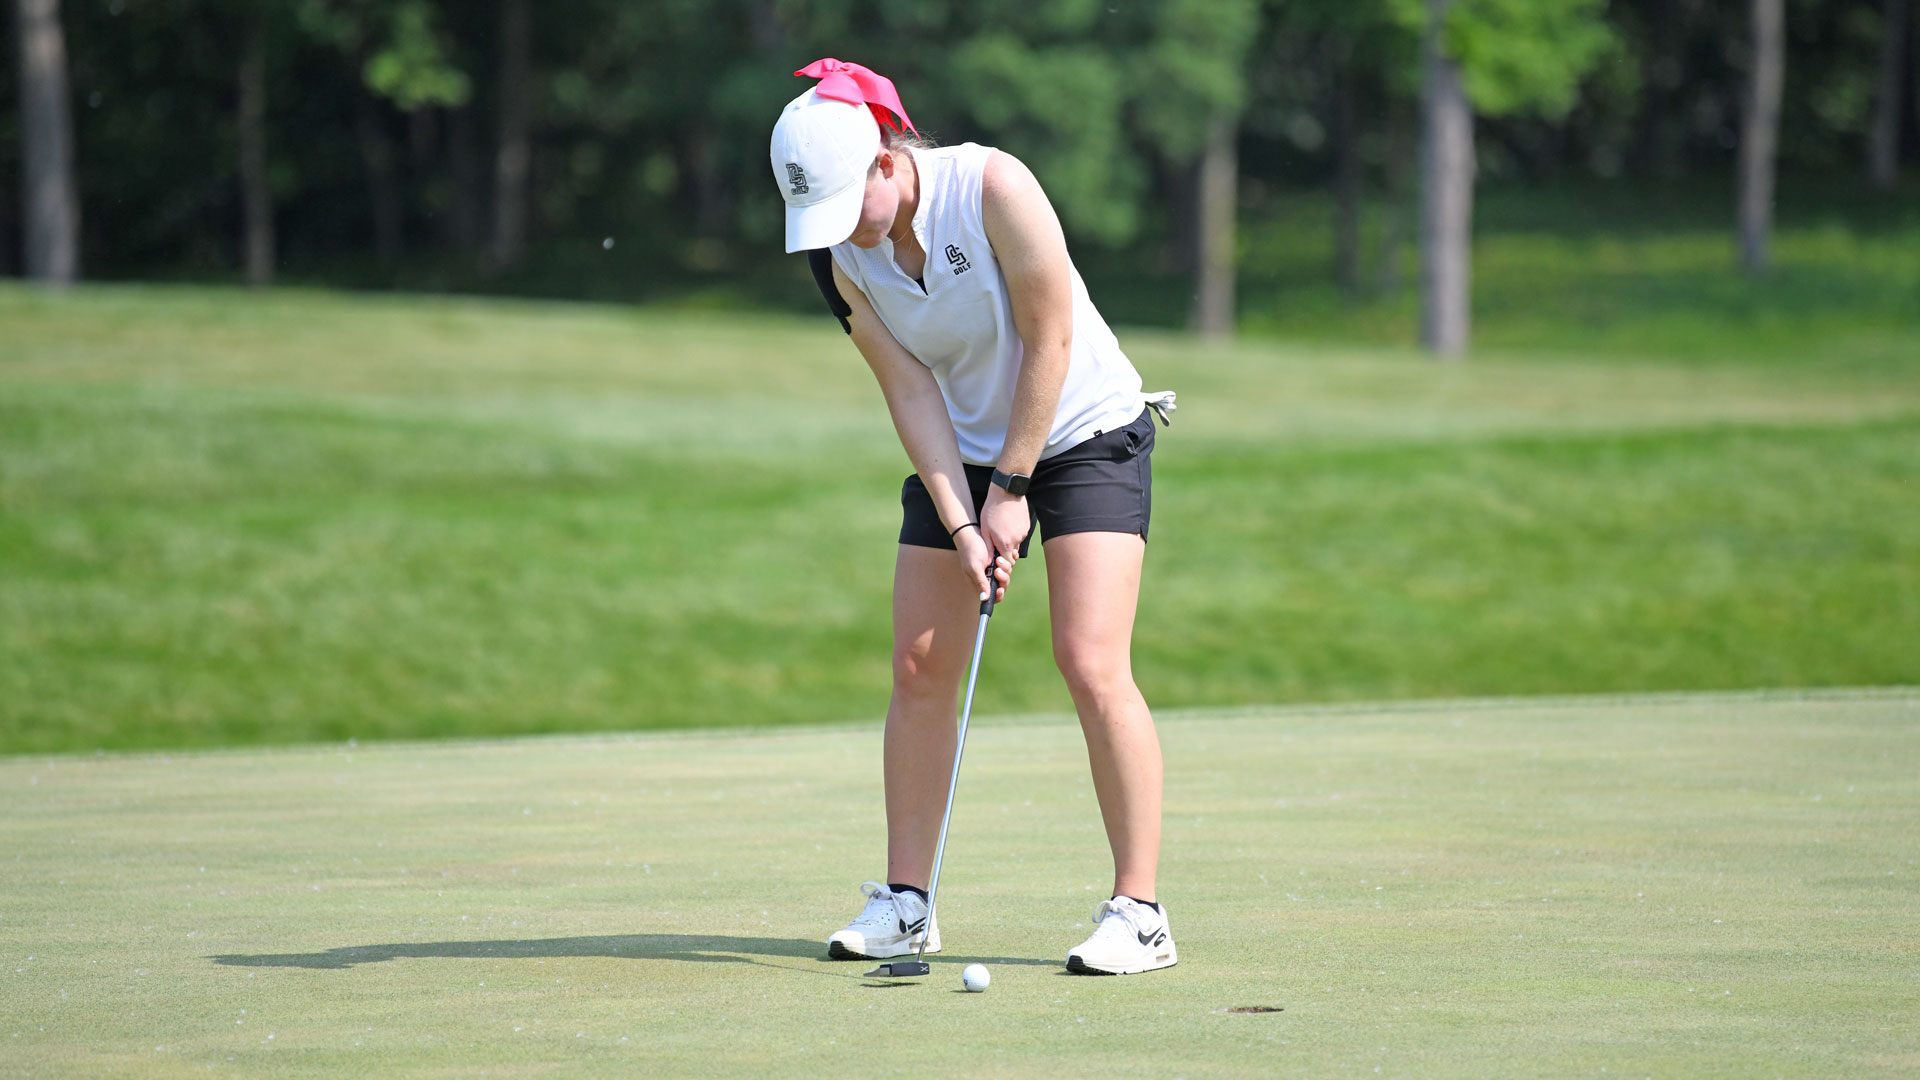 Field Cut on Day Two of NAIA Women’s Golf National Championship